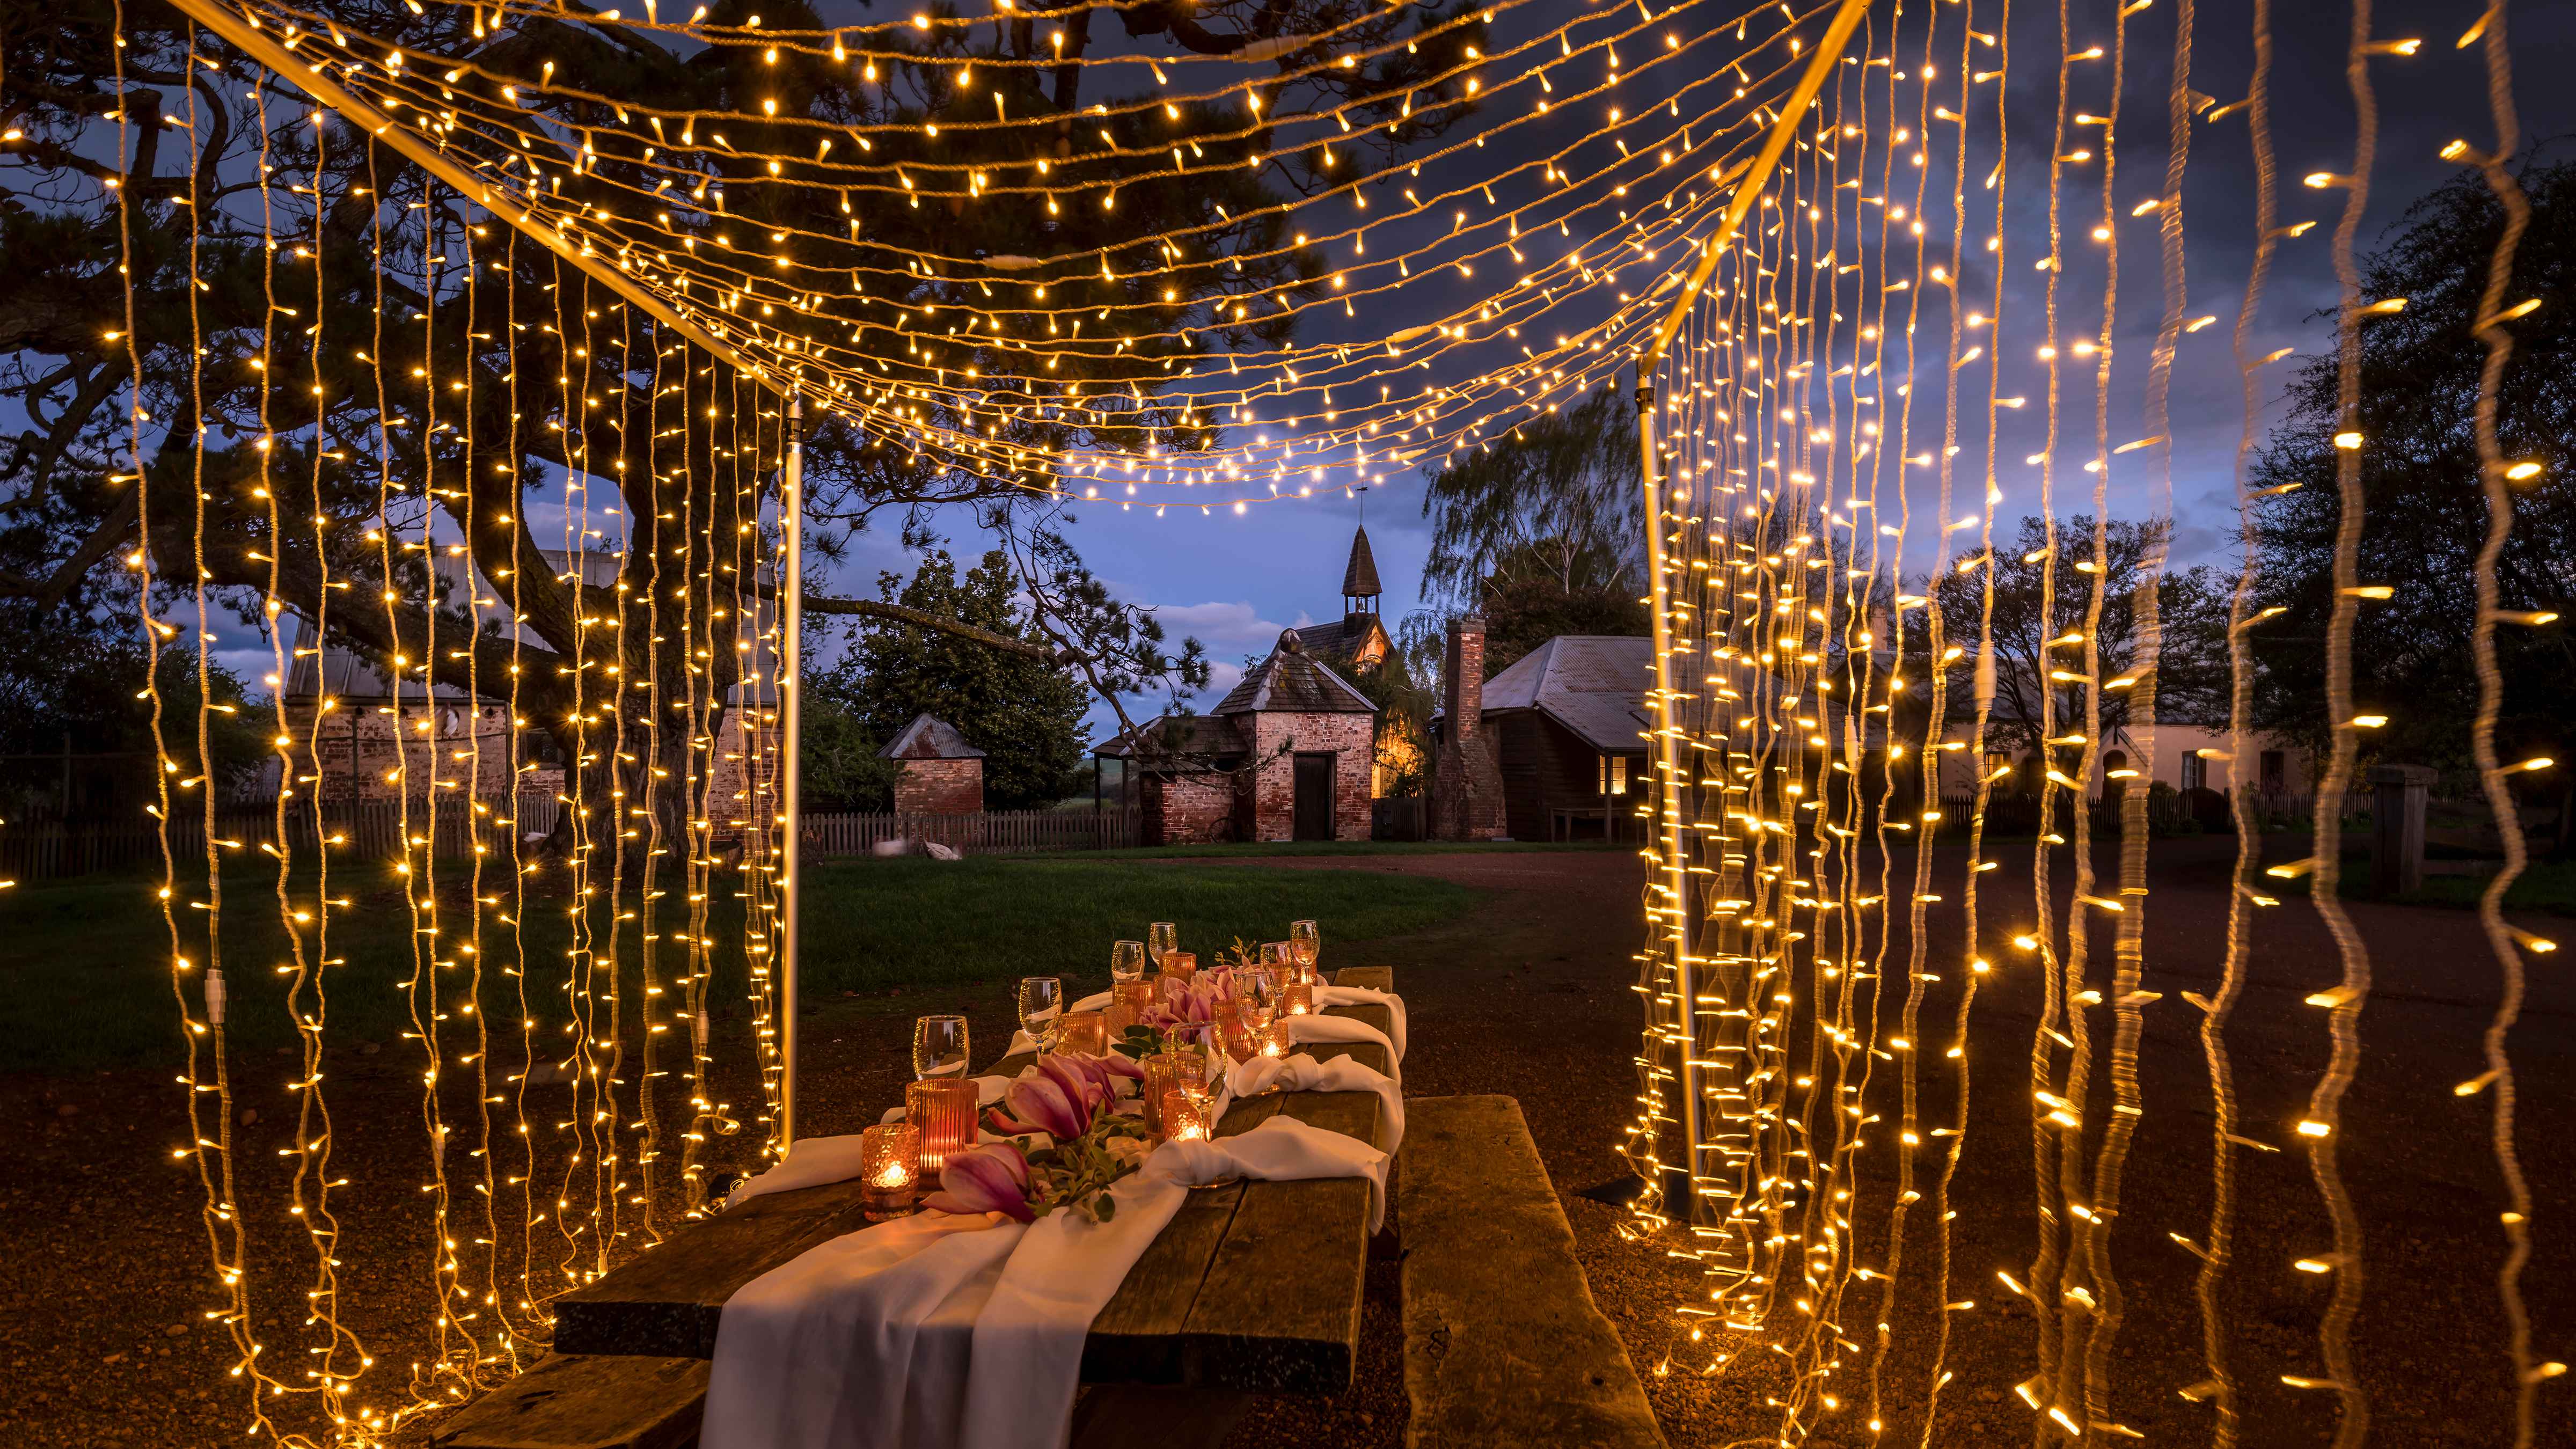 A frame of fairy lights drape over an outdoor table set with wine glasses, flowers and table linen. Farm buildings line the roadway in the background and the sky is starting to darken. Photo: Rob Burnett.